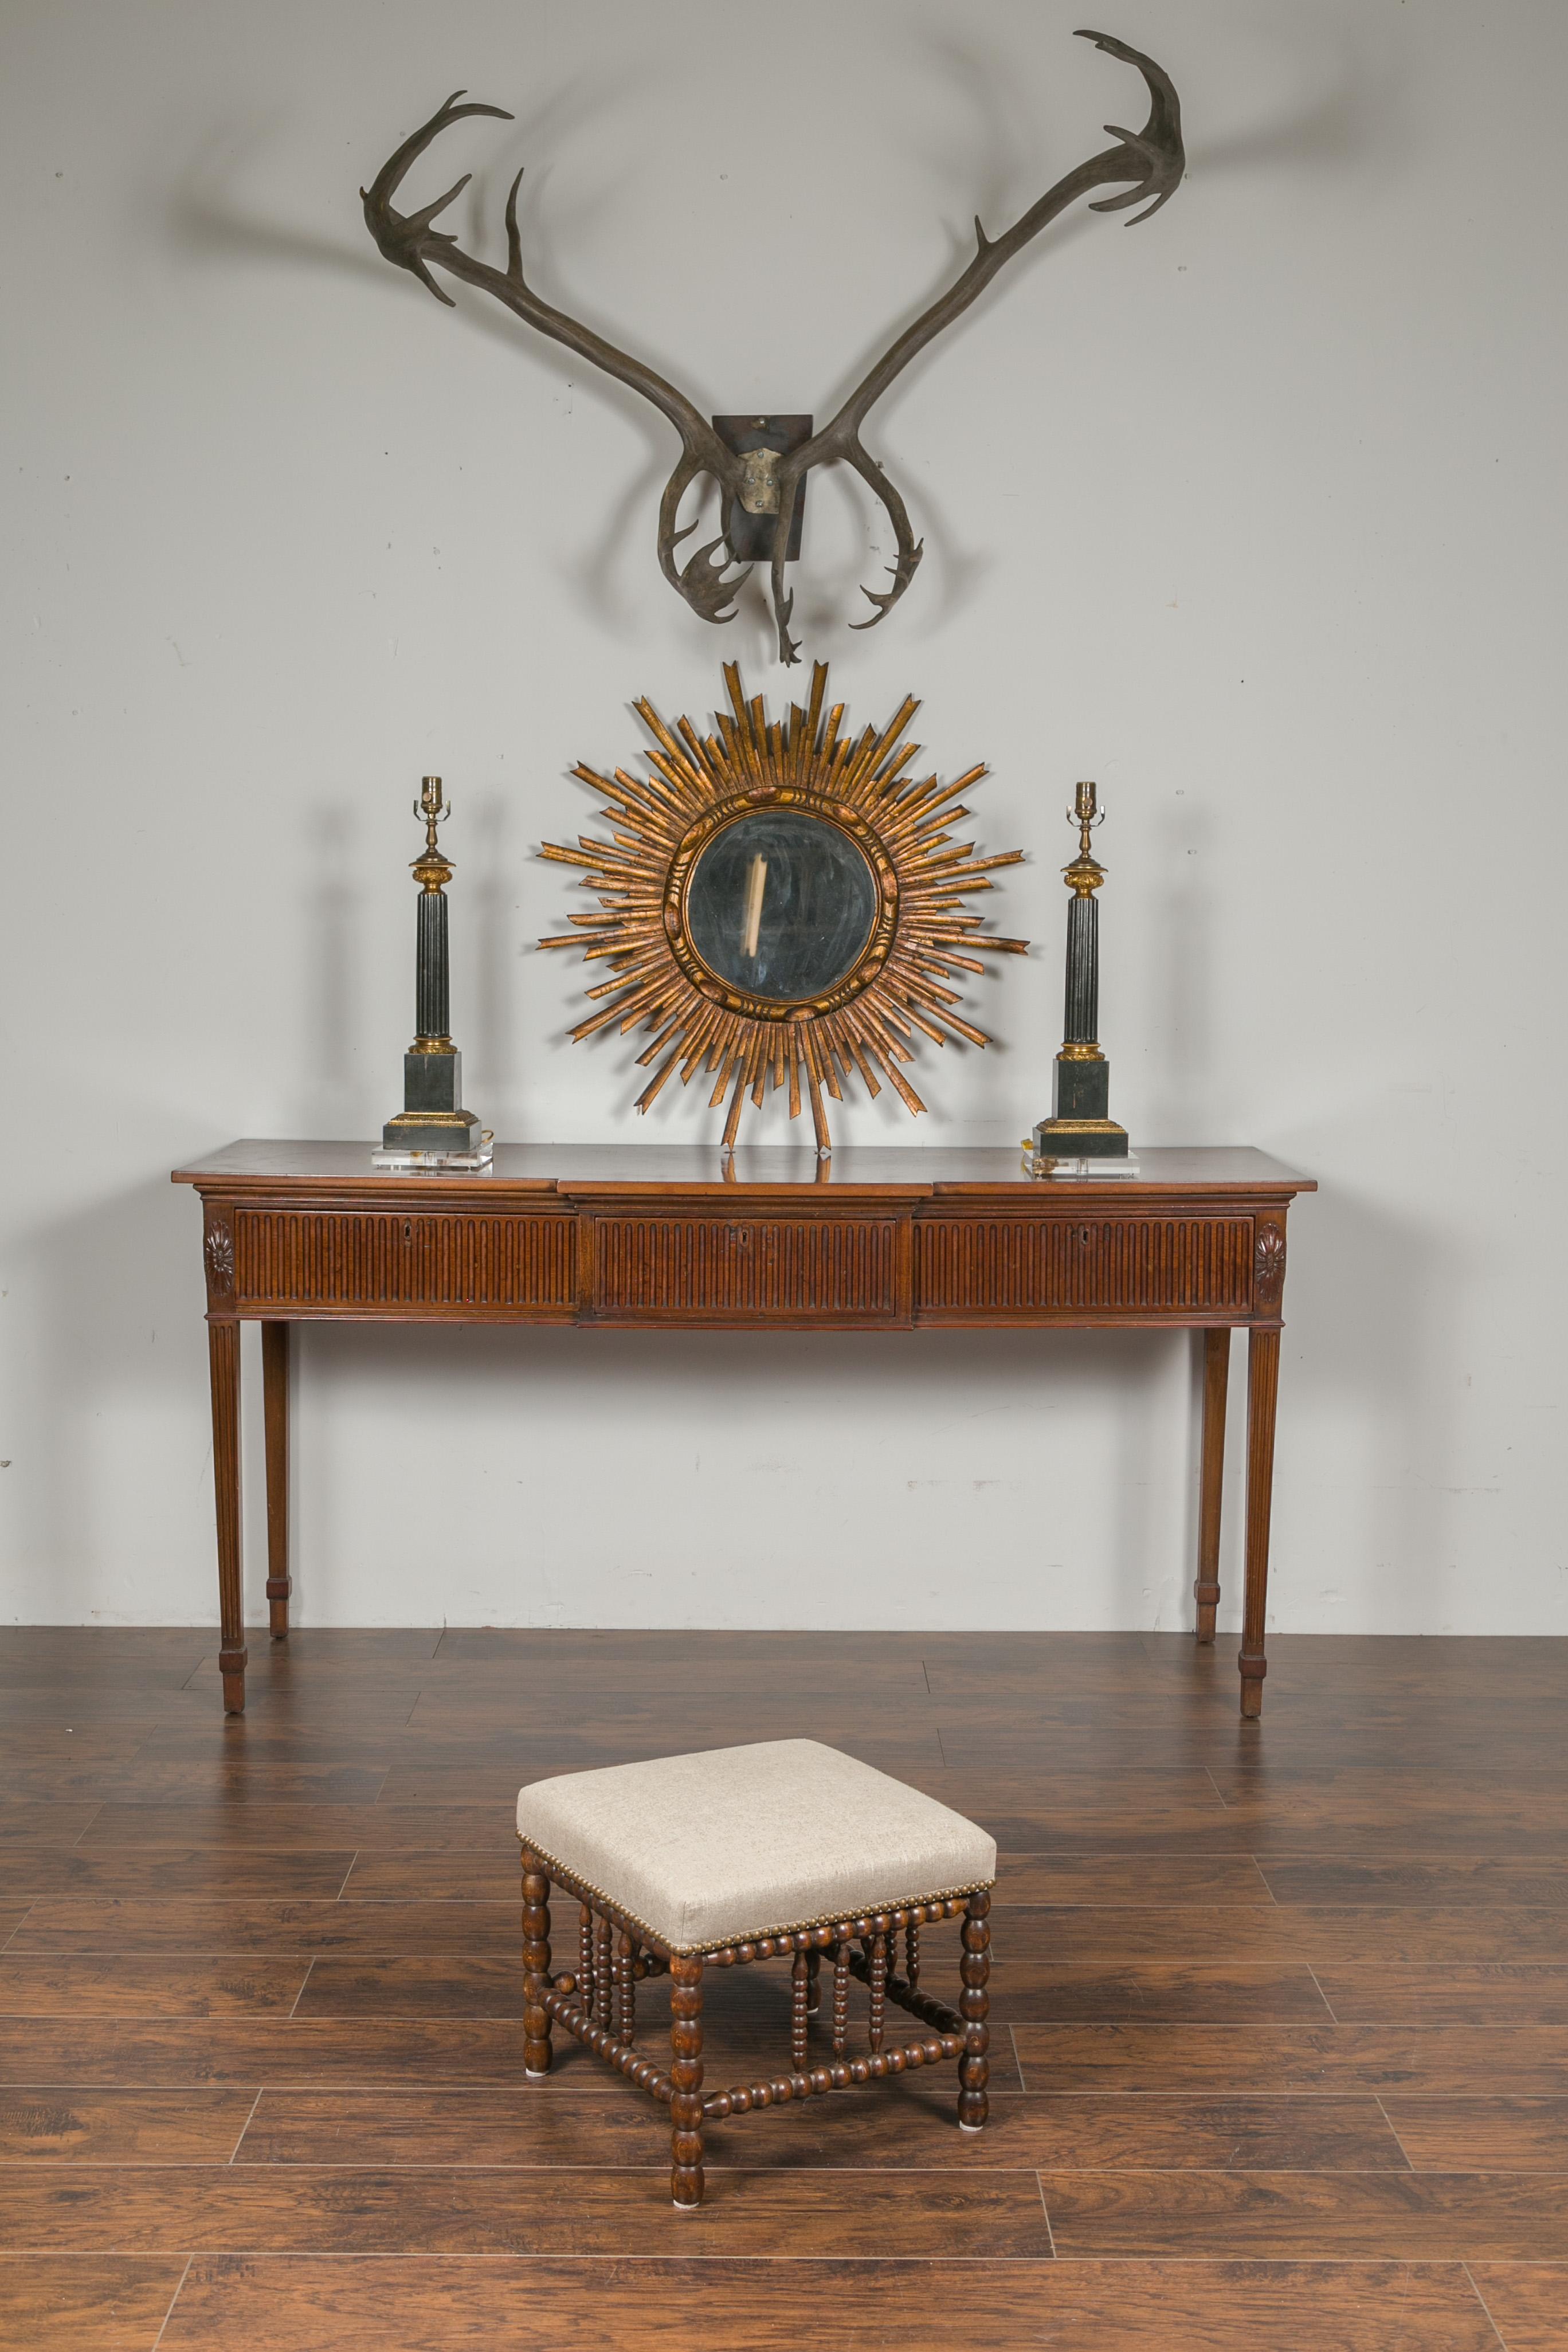 An English oak footstool from the early 20th century, with bobbin legs and new upholstery. Born in England during the turn of the century, this oak footstool features a square top covered with a linen fabric and nailhead trim, sitting above an